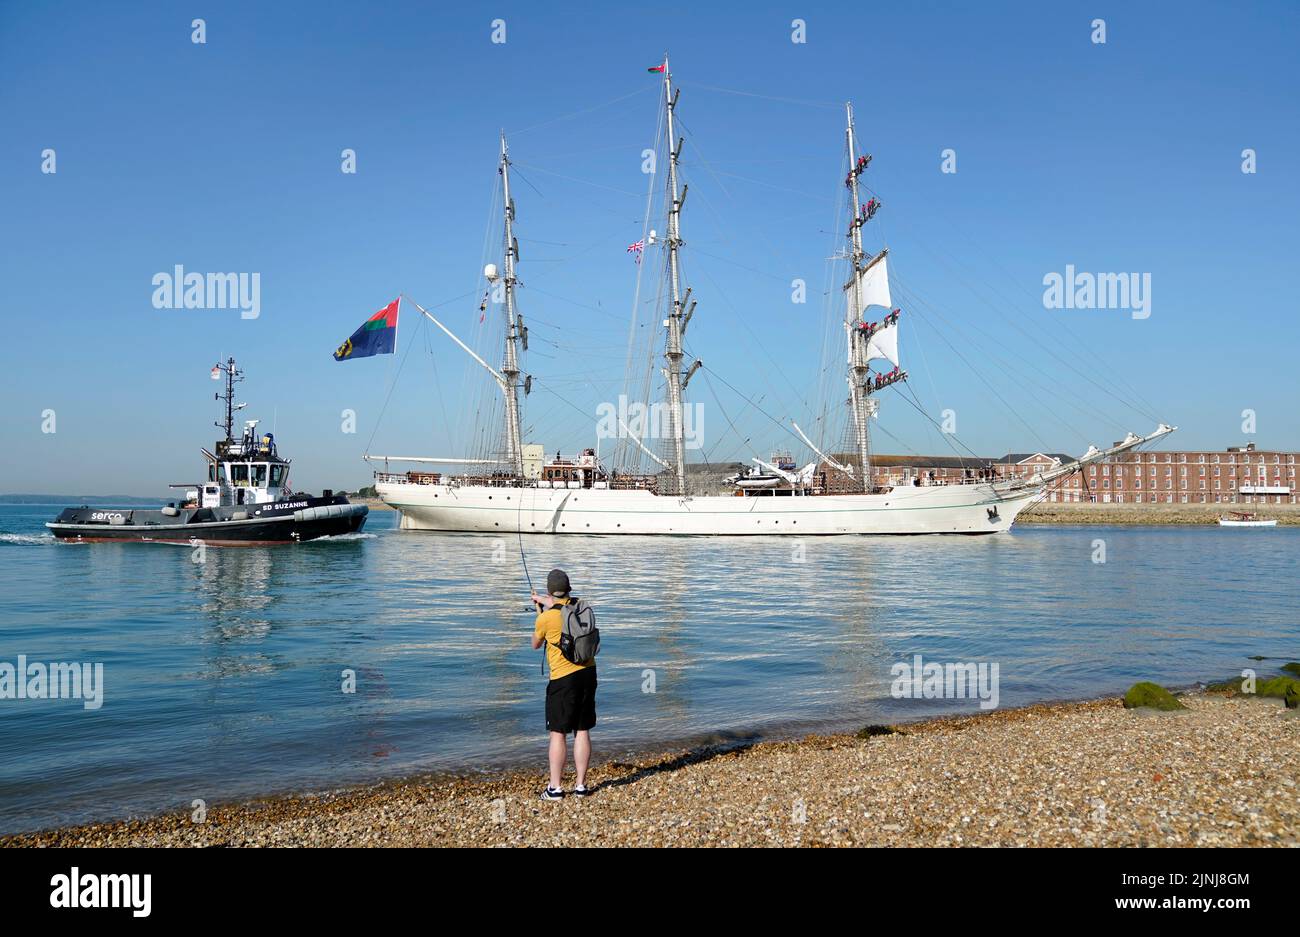 The vessel Shabab Oman II, a full-rigged training ship of the Royal Navy of Oman, arrives into Portsmouth Harbour. The ship is a blend of the traditional and modern with state of the art computerised communication systems and navigation equipment, but from the wooden decking upwards, the ship is traditional in terms of her sails and rigging. Picture date: Friday August 12, 2022. Stock Photo